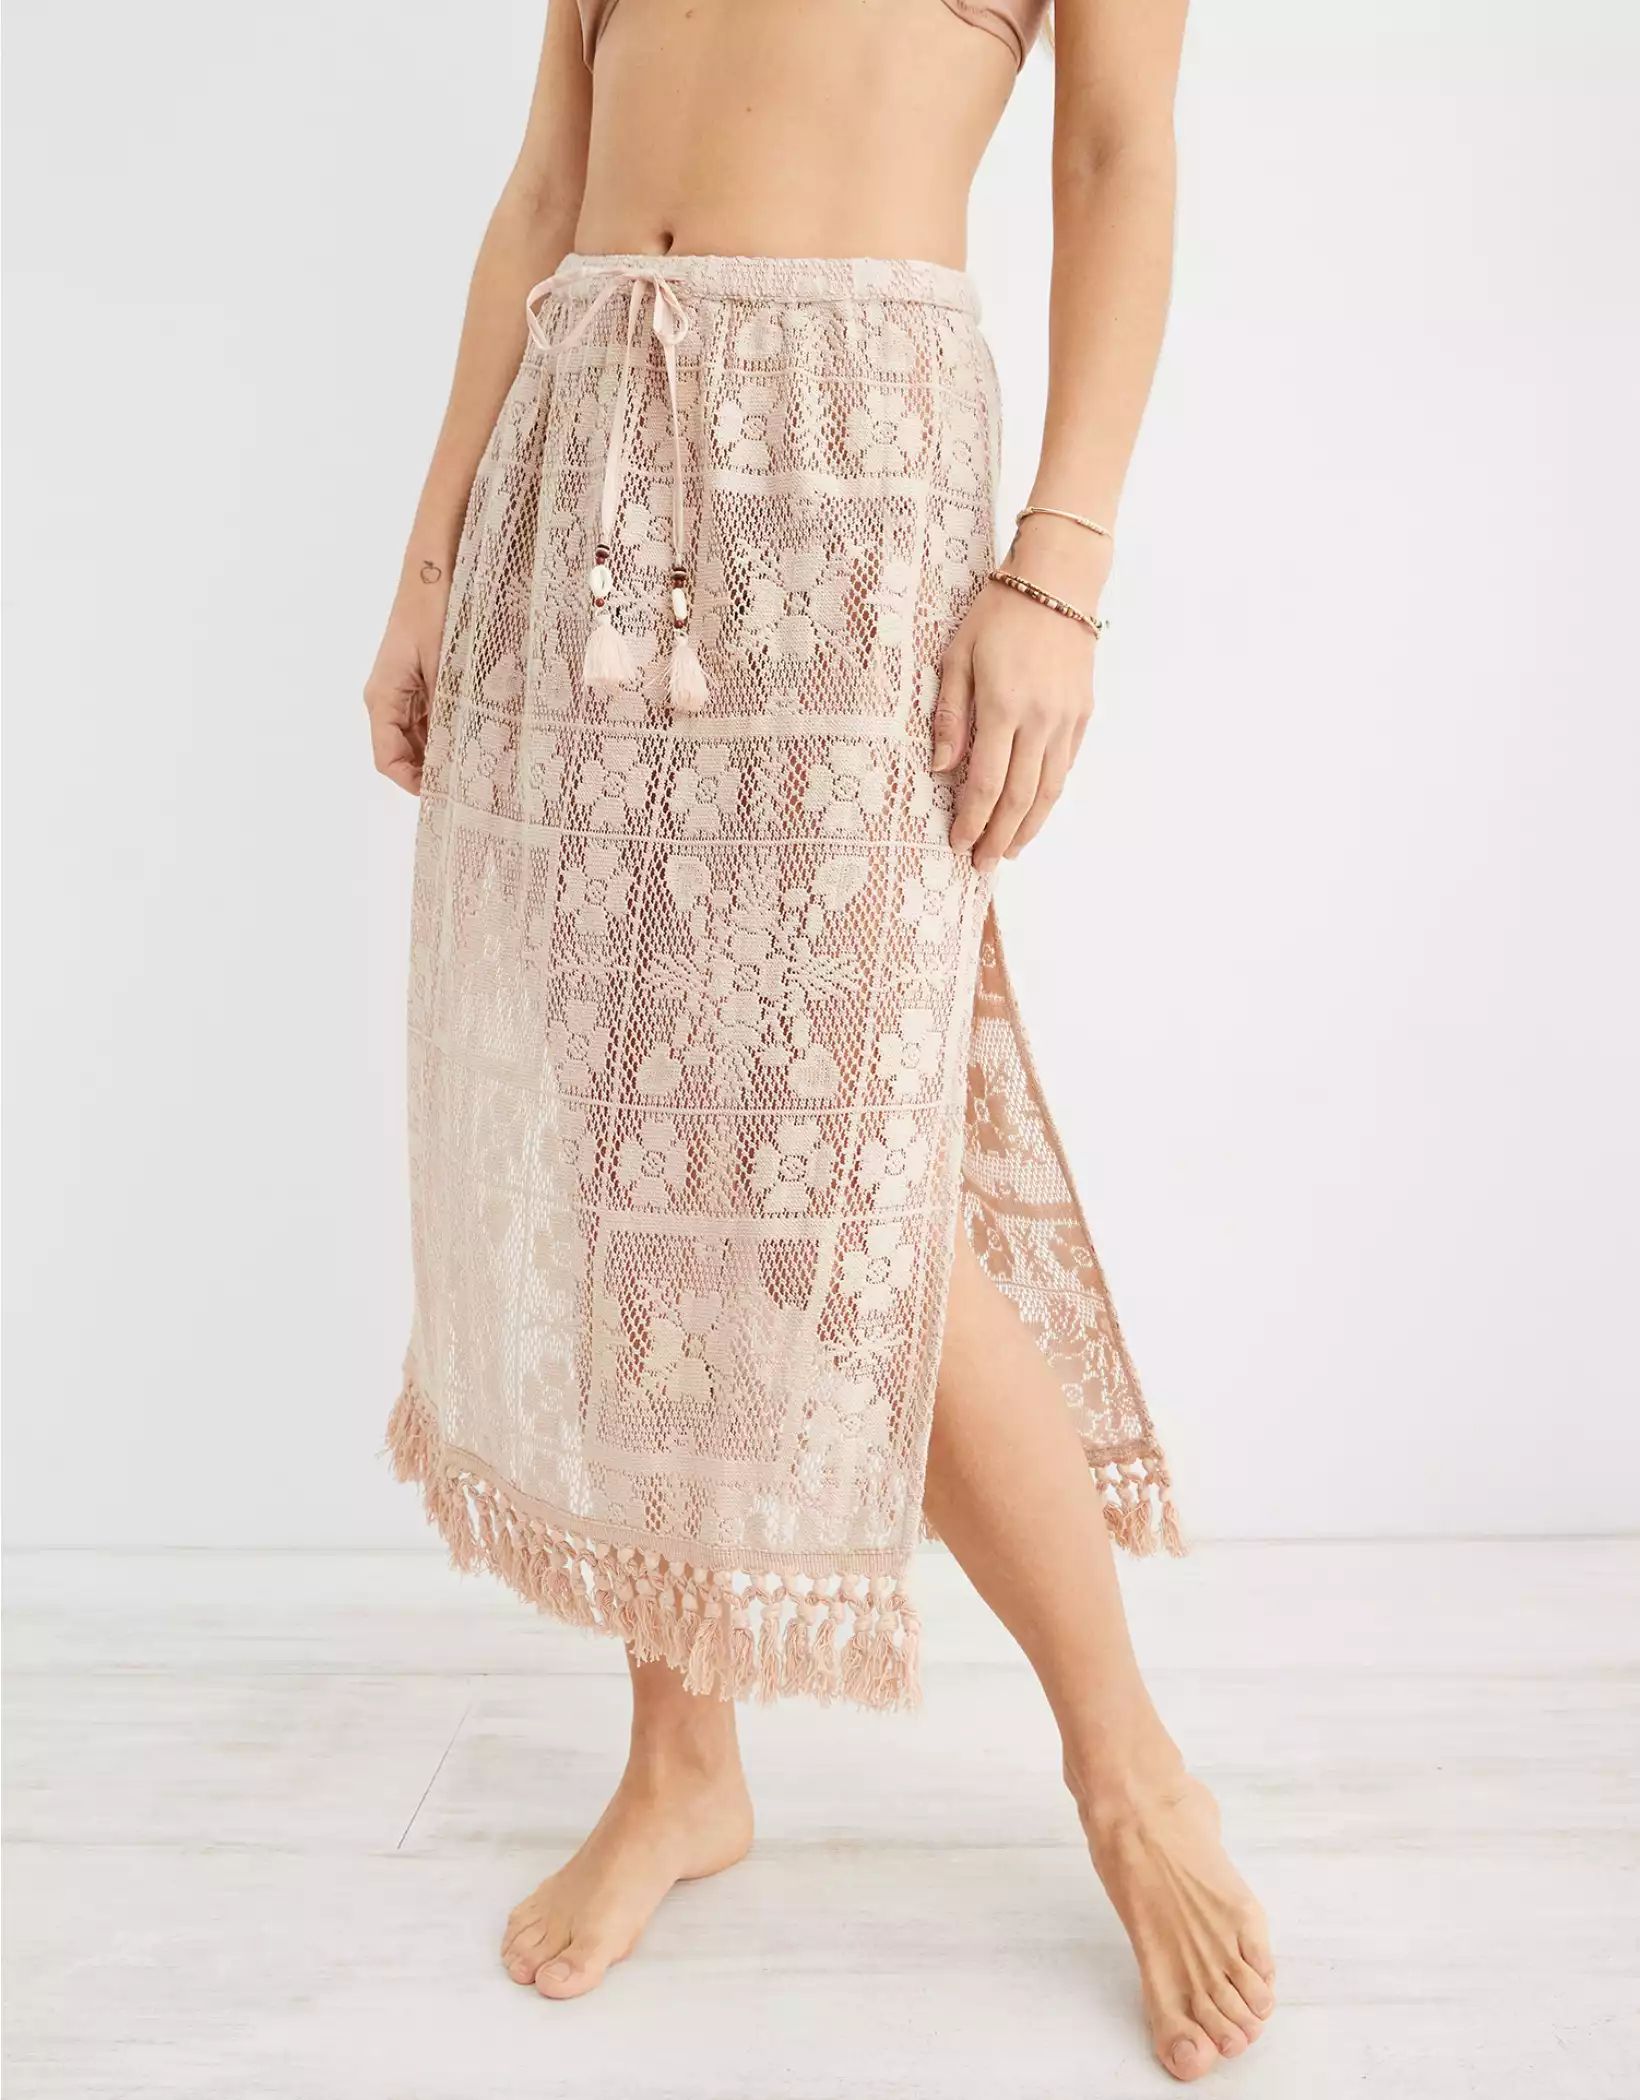 Aerie Patchwork Lace Cover Up Skirt | Aerie